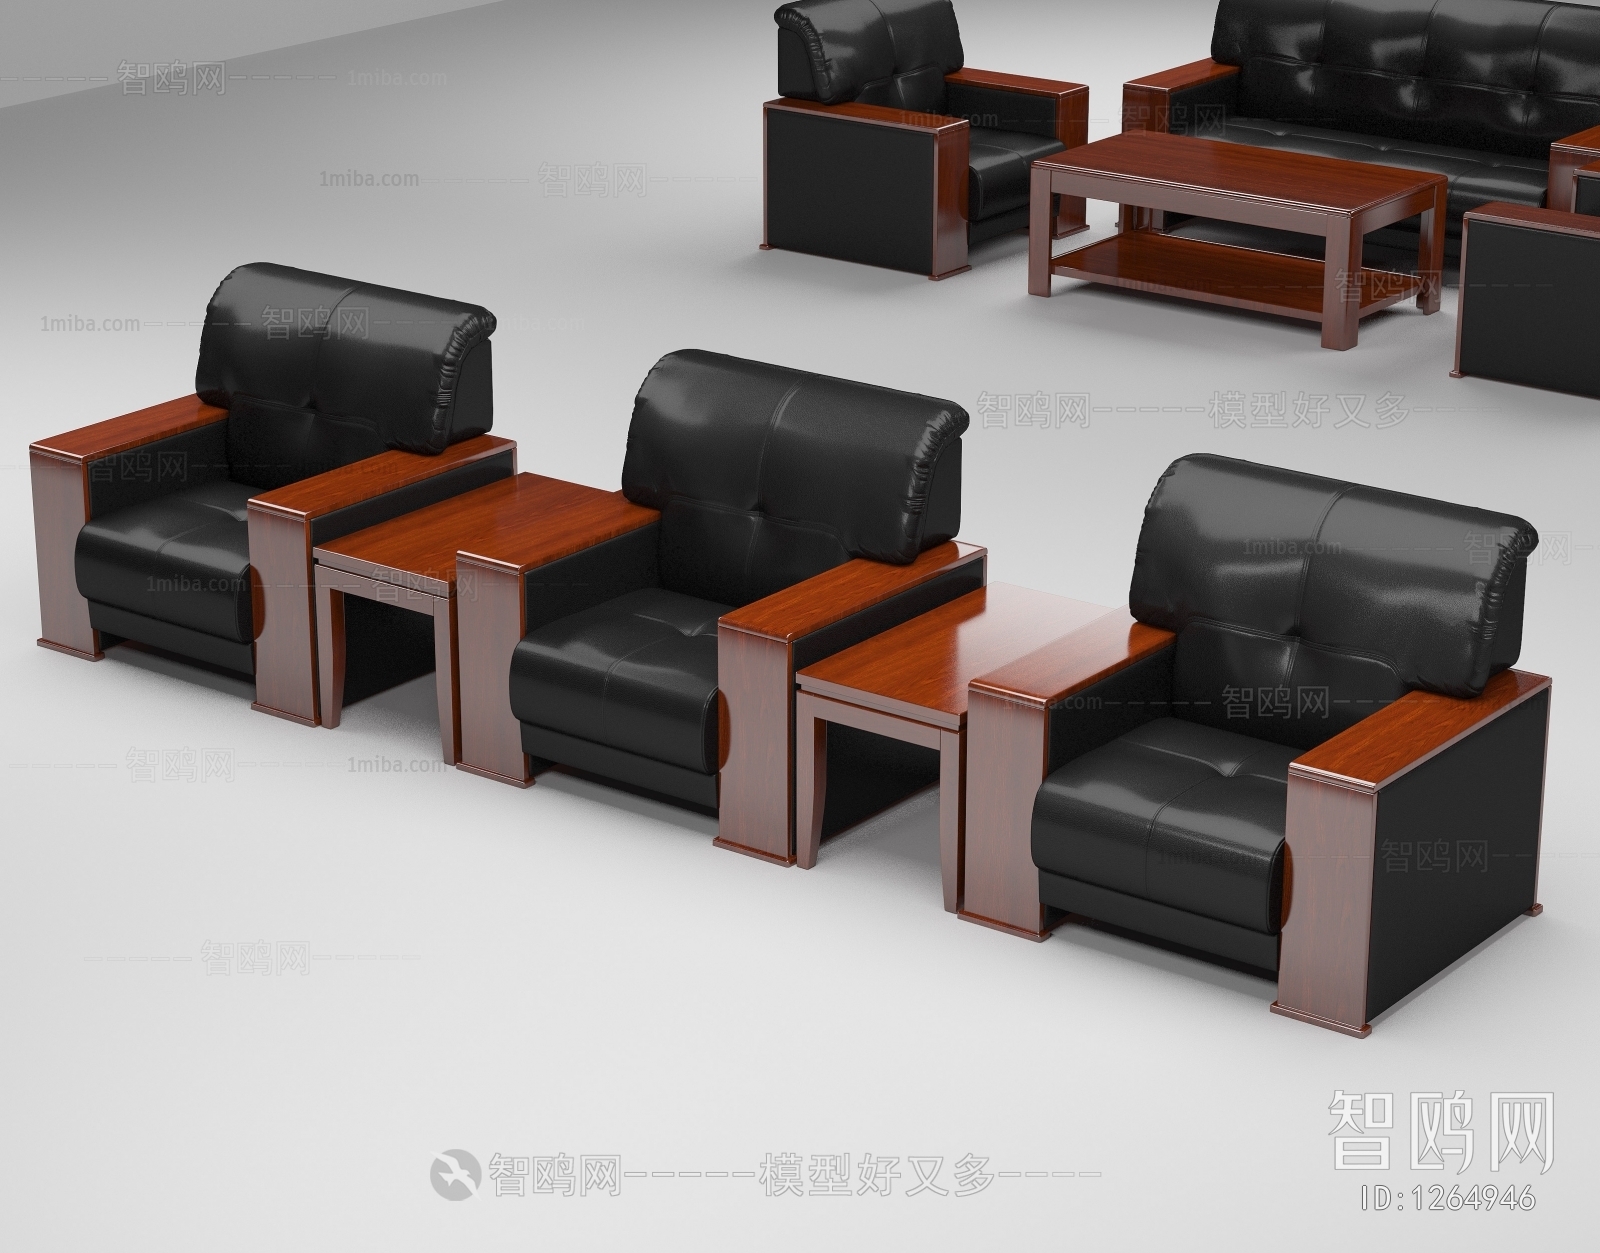 New Chinese Style Office Chair